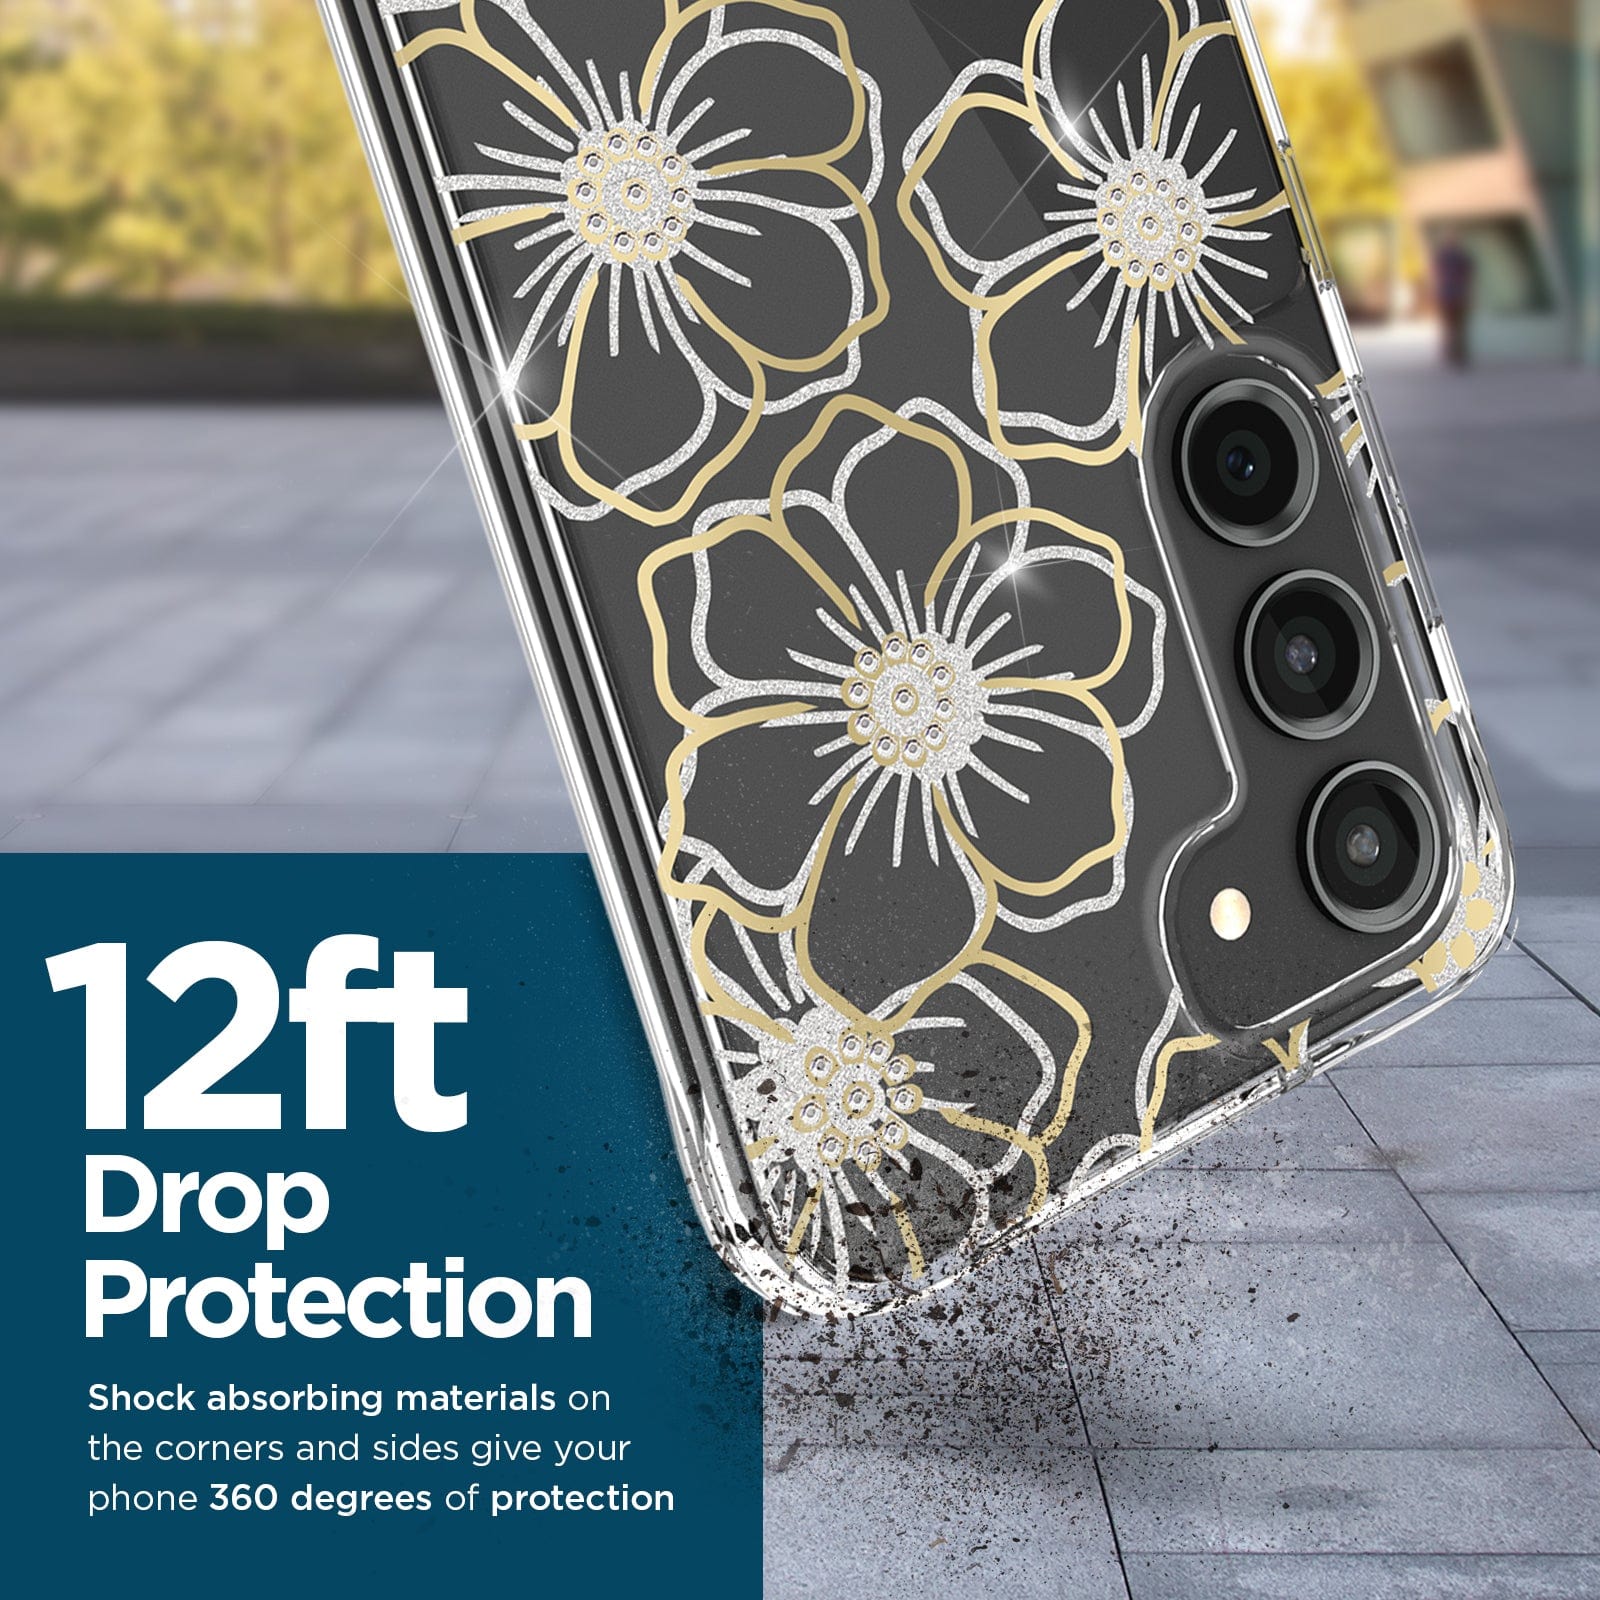 12 FOOT DROP PROTECTION. SHOCK ABSORBING MATERIALS ONT HE CORNERS AND SIDES GIVE YOUR PHONE 360 DEGREES OF PROTECTION